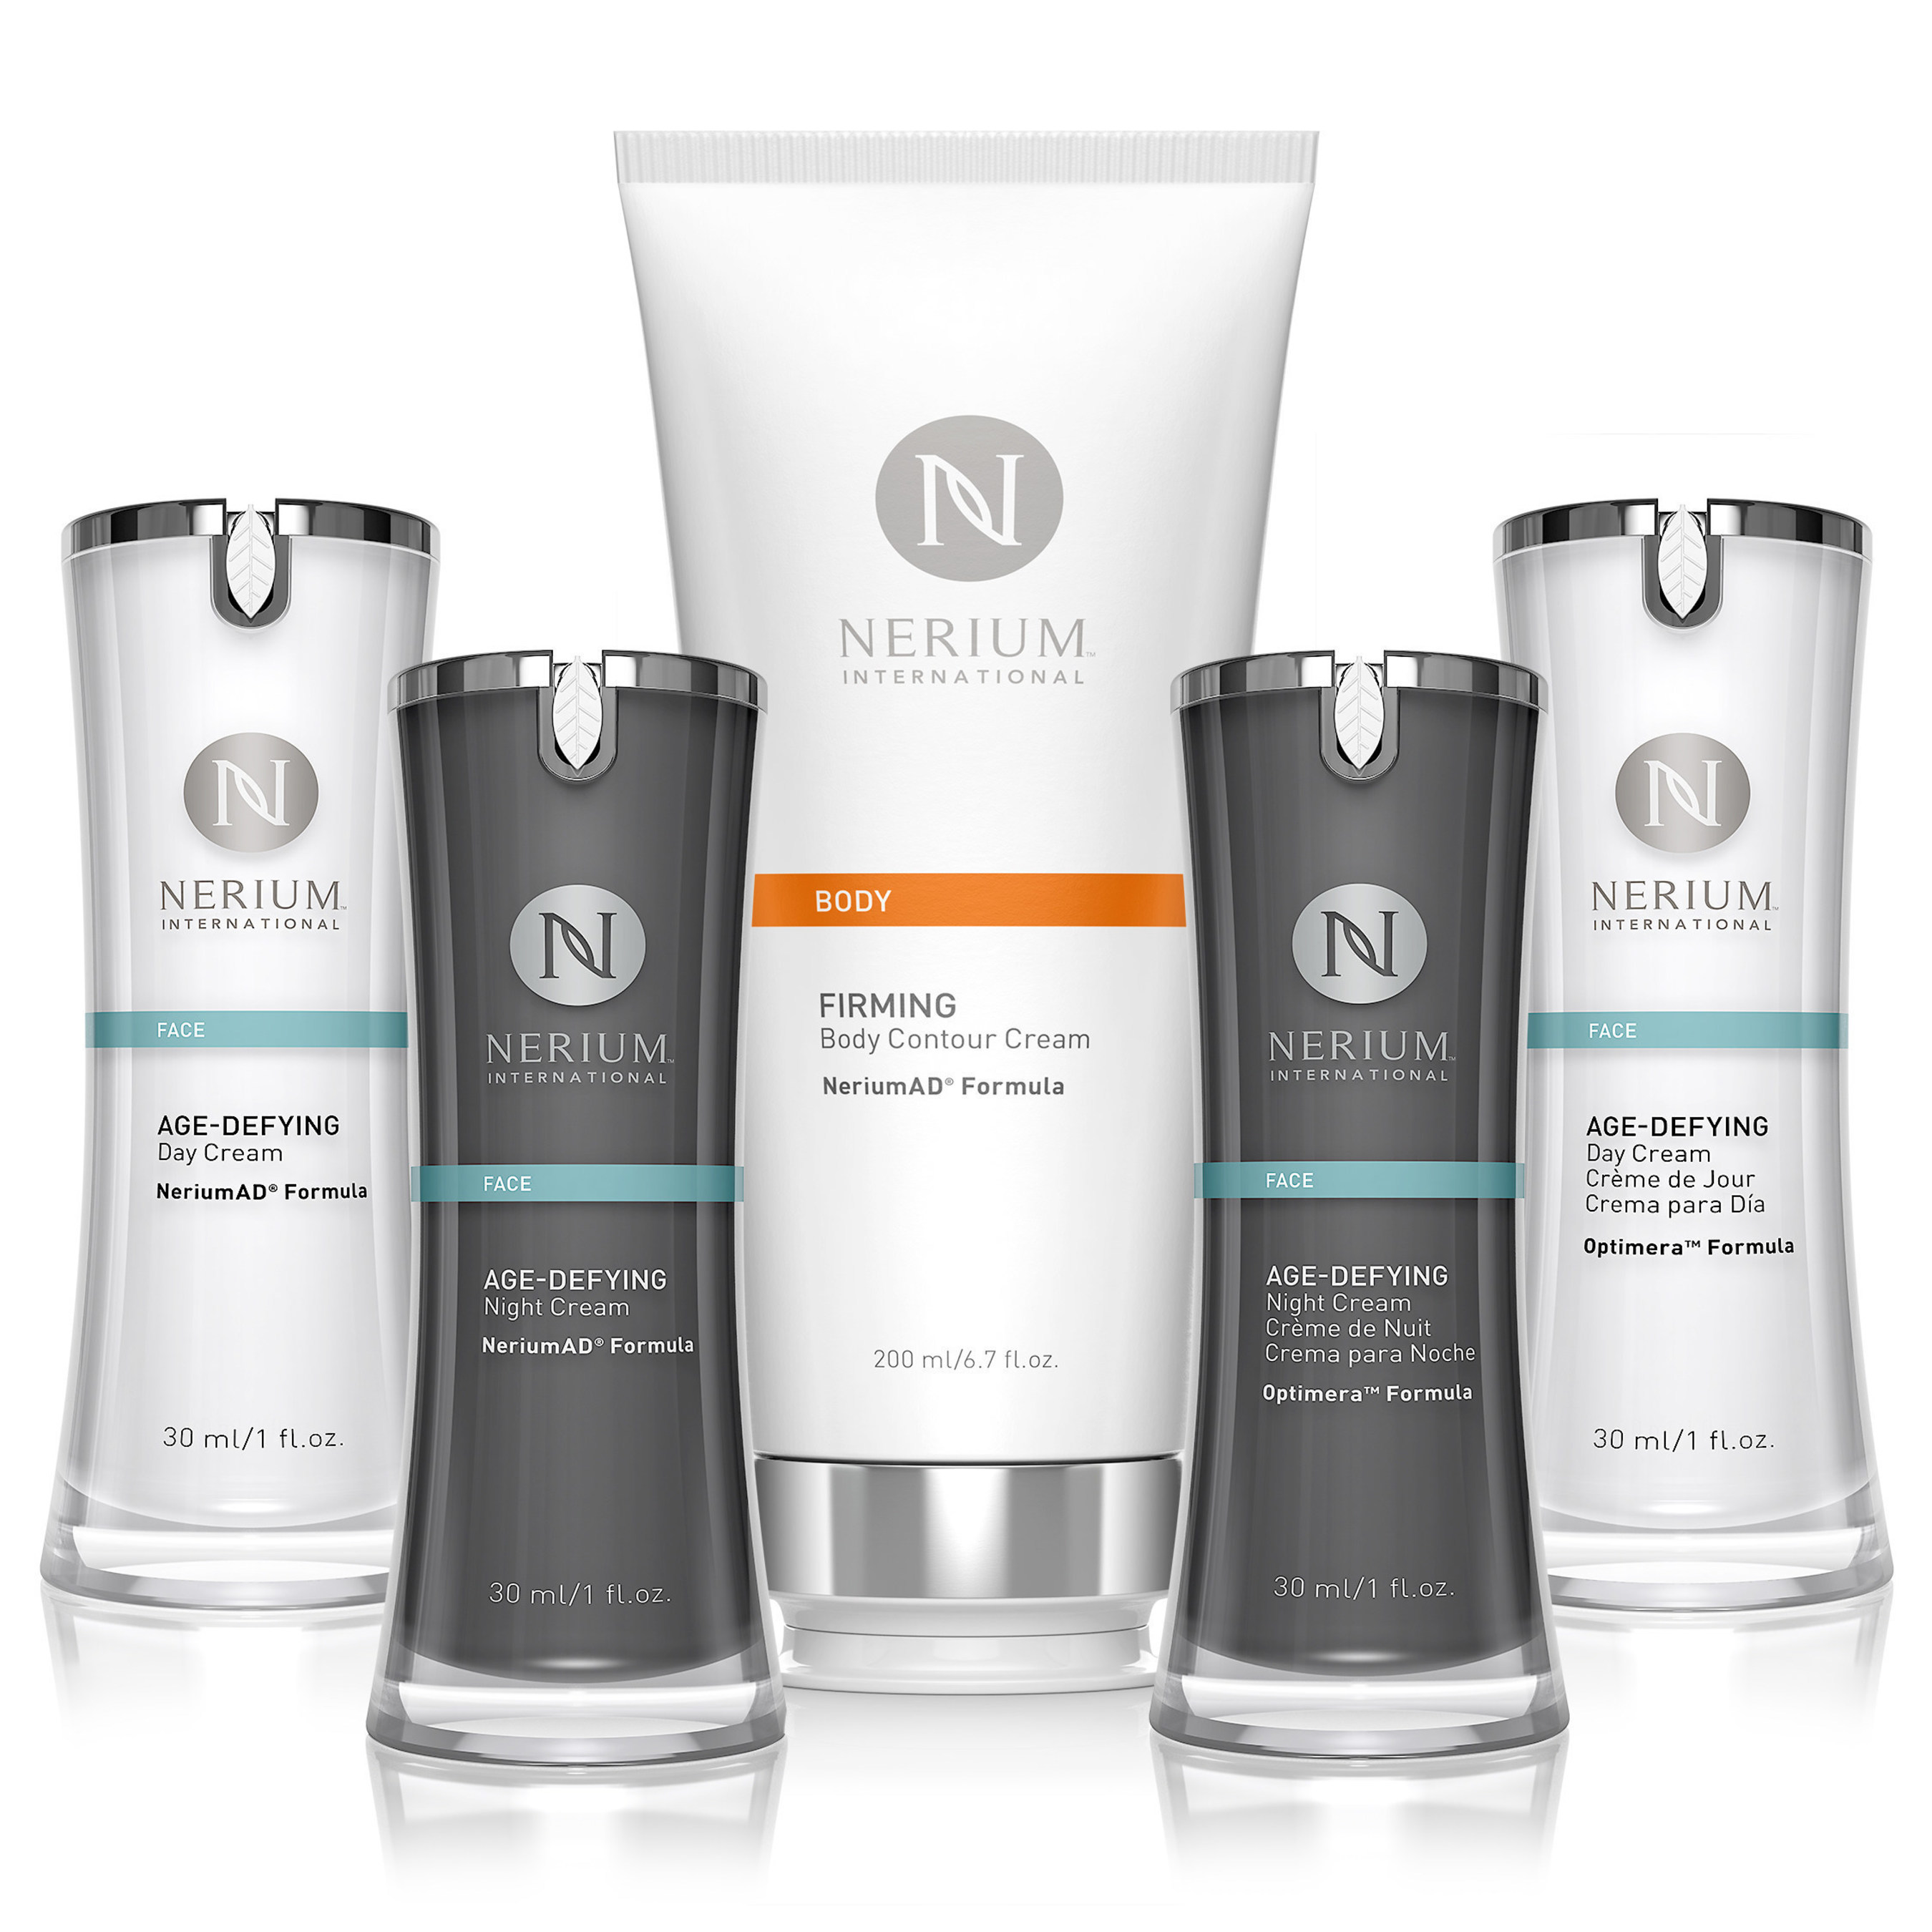 Nerium and Optimera products